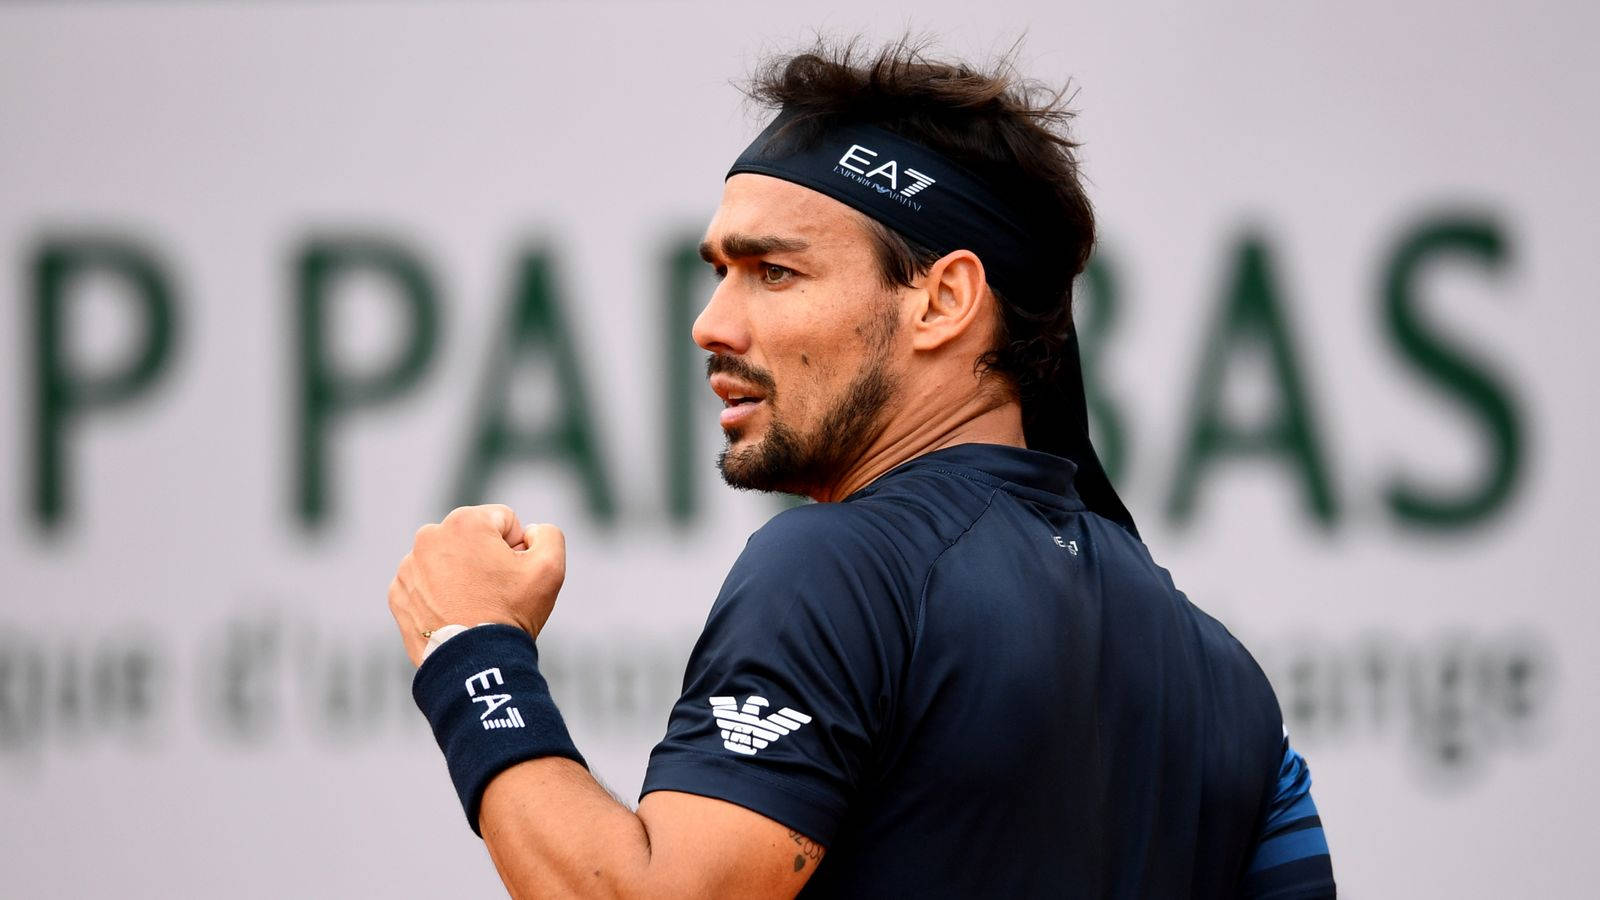 Fabio Fognini Celebrating Victory with a Clenched Fist. Wallpaper